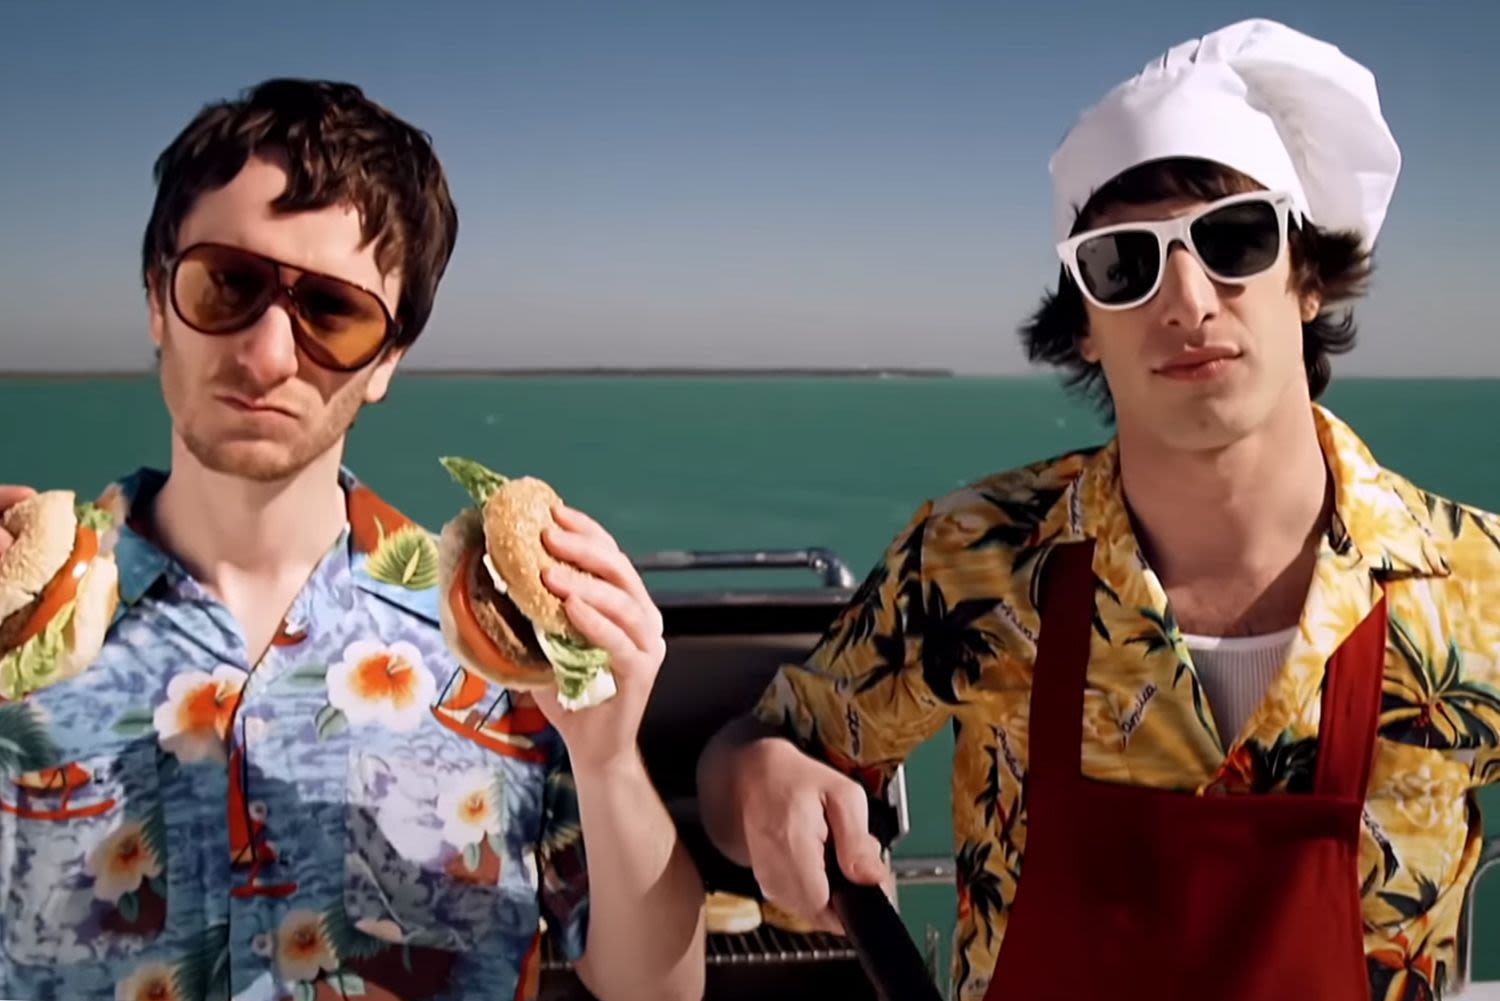 Lonely Island members regret being dirty or scary 'with no warning' on 'SNL'